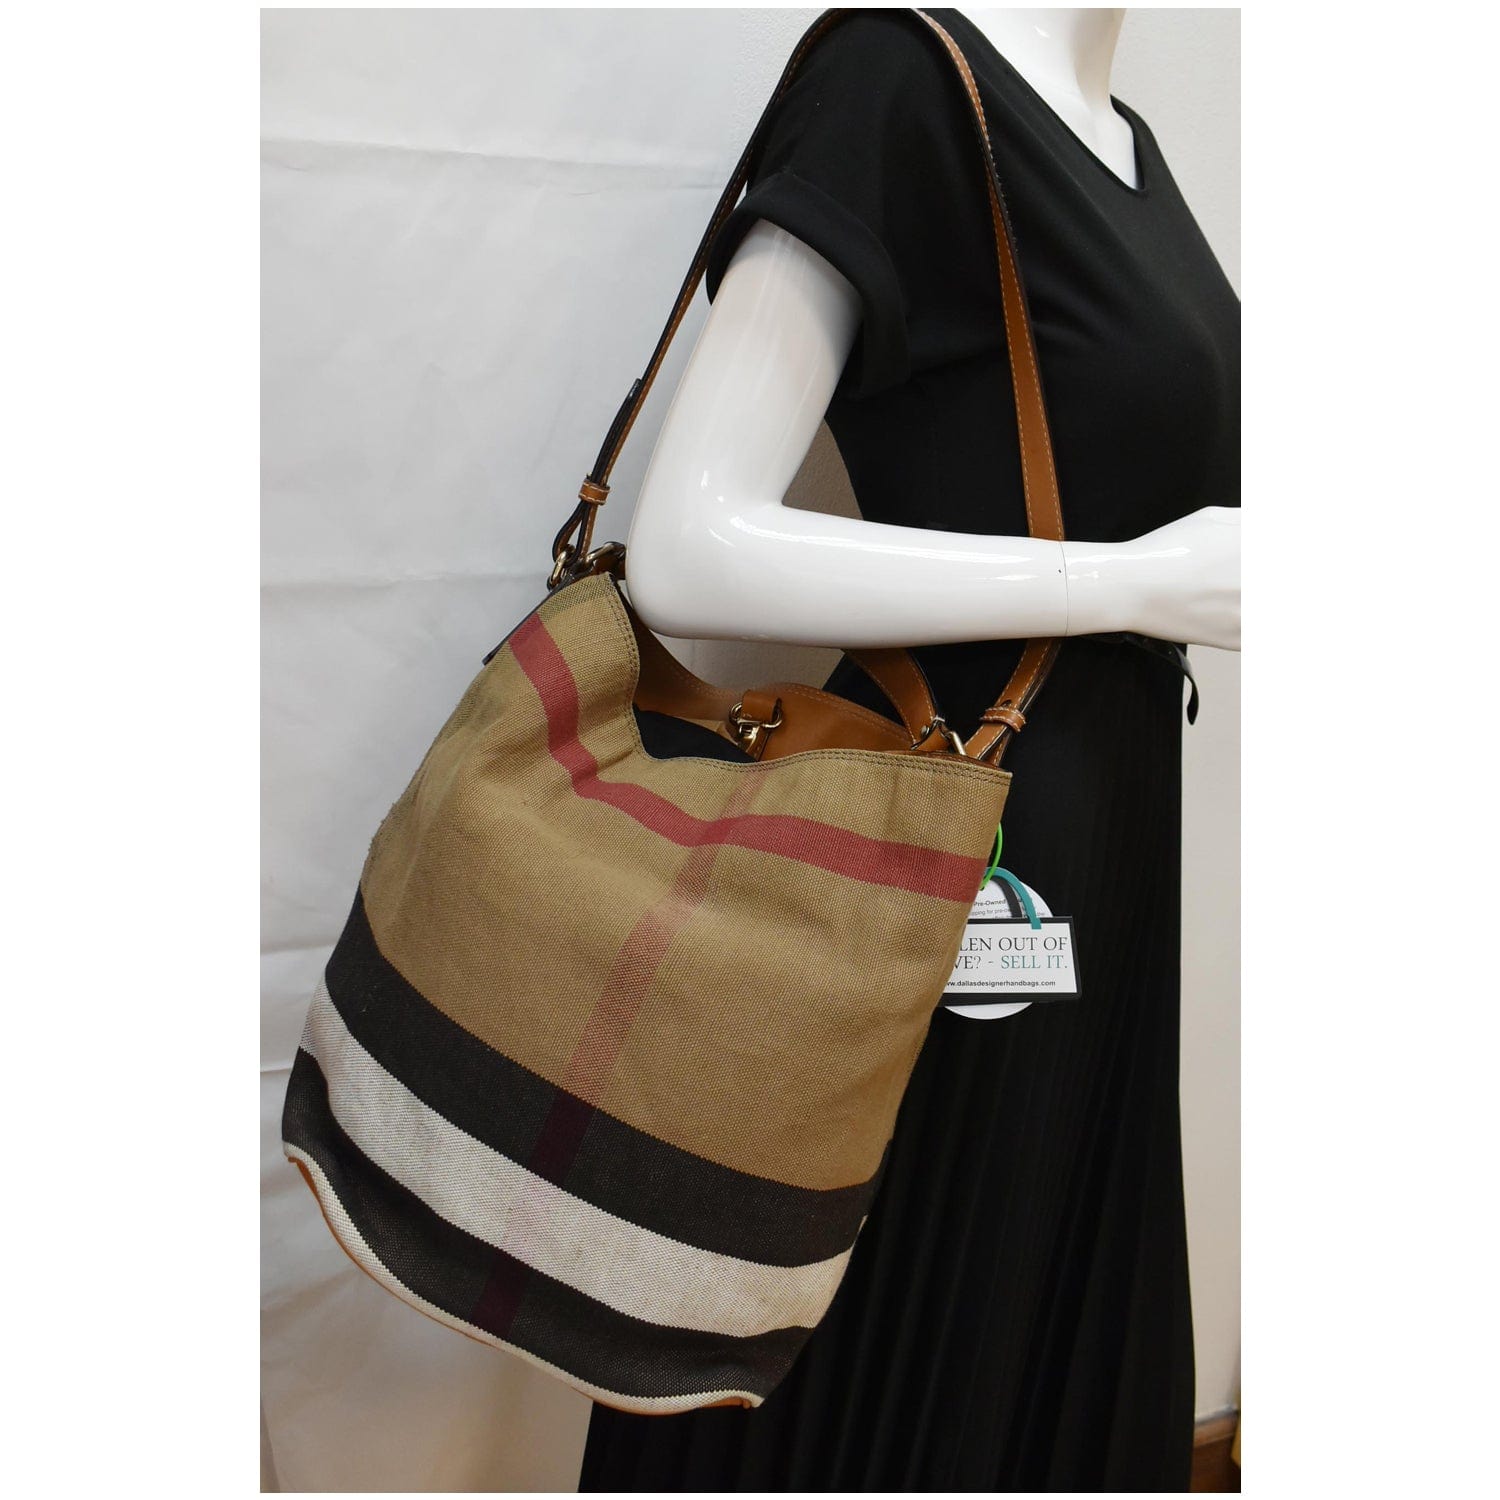 Shop Burberry Vintage Bags, Burberry Used Bags